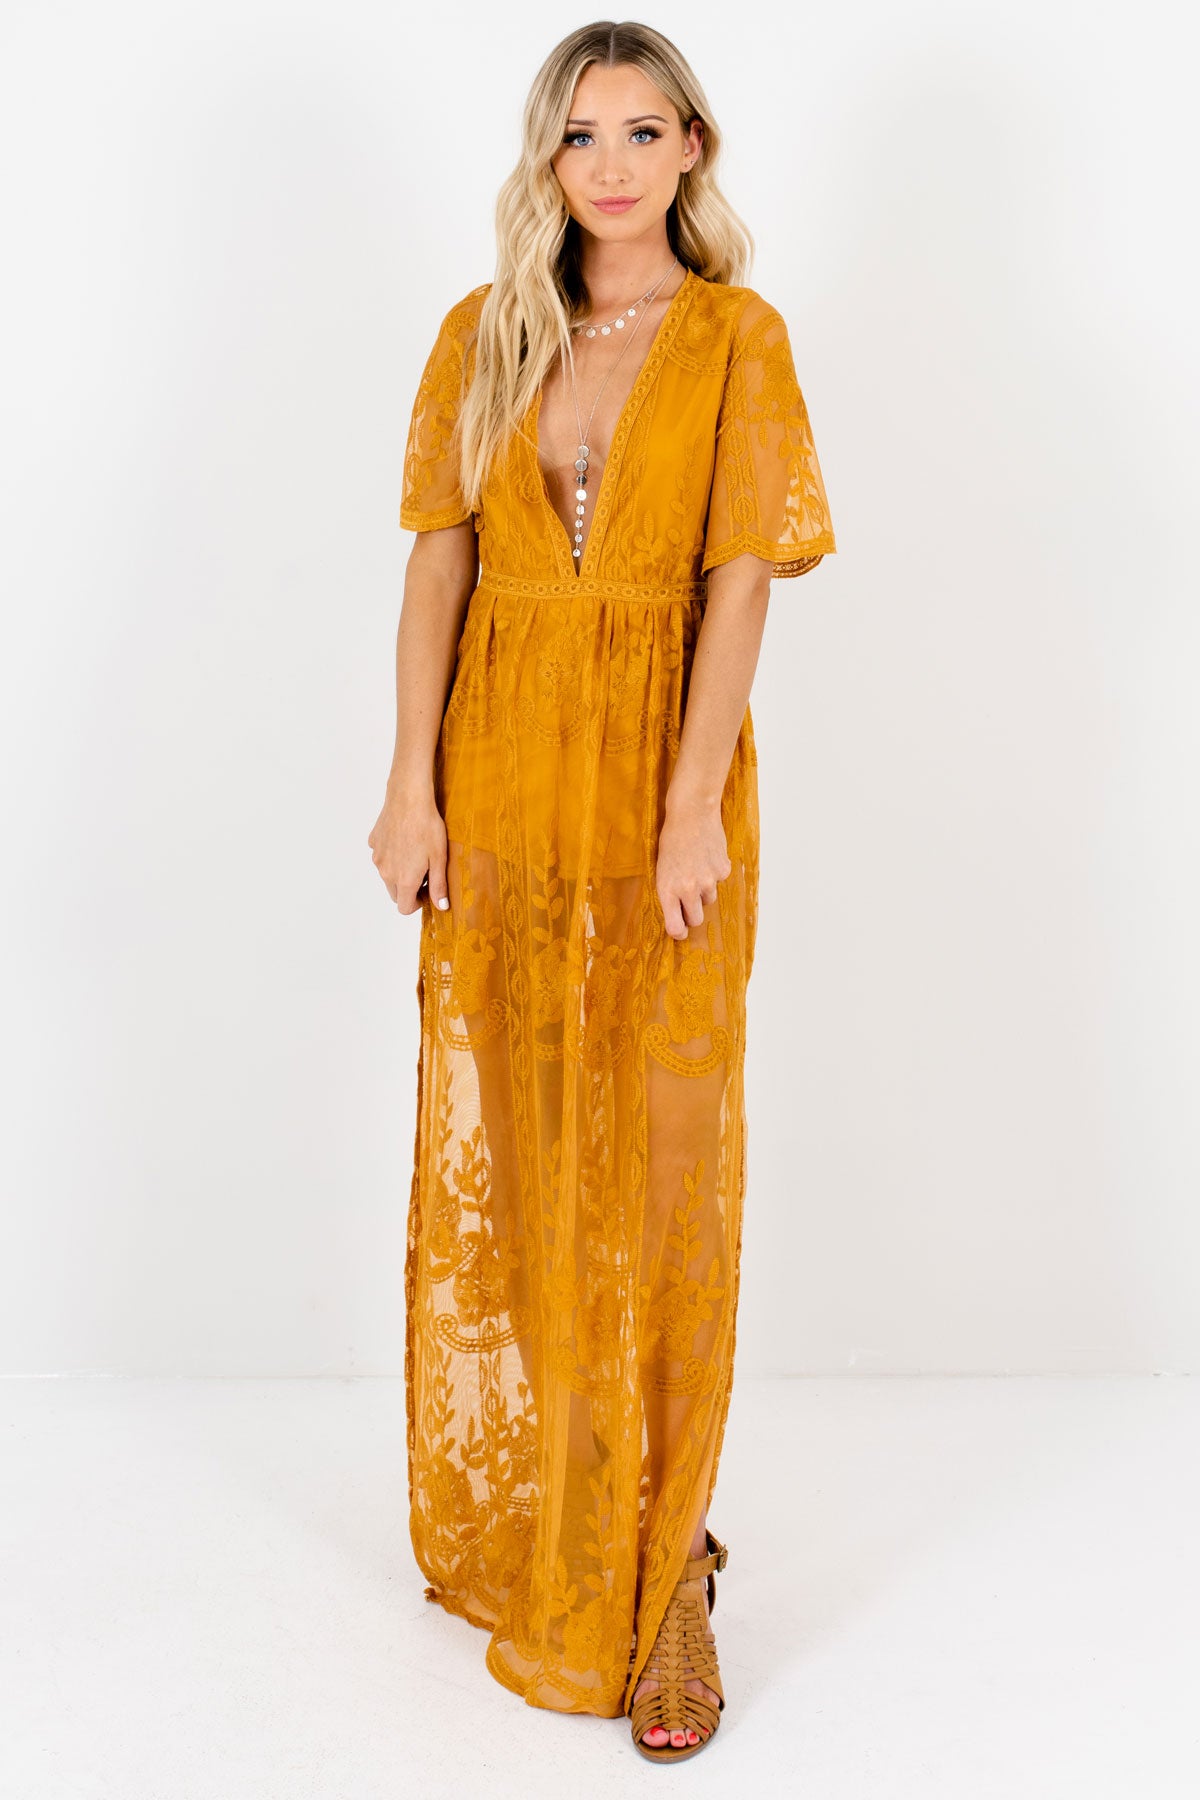 Mustard Yellow Lace Floral Romper Lining  Maxi Dresses for Women